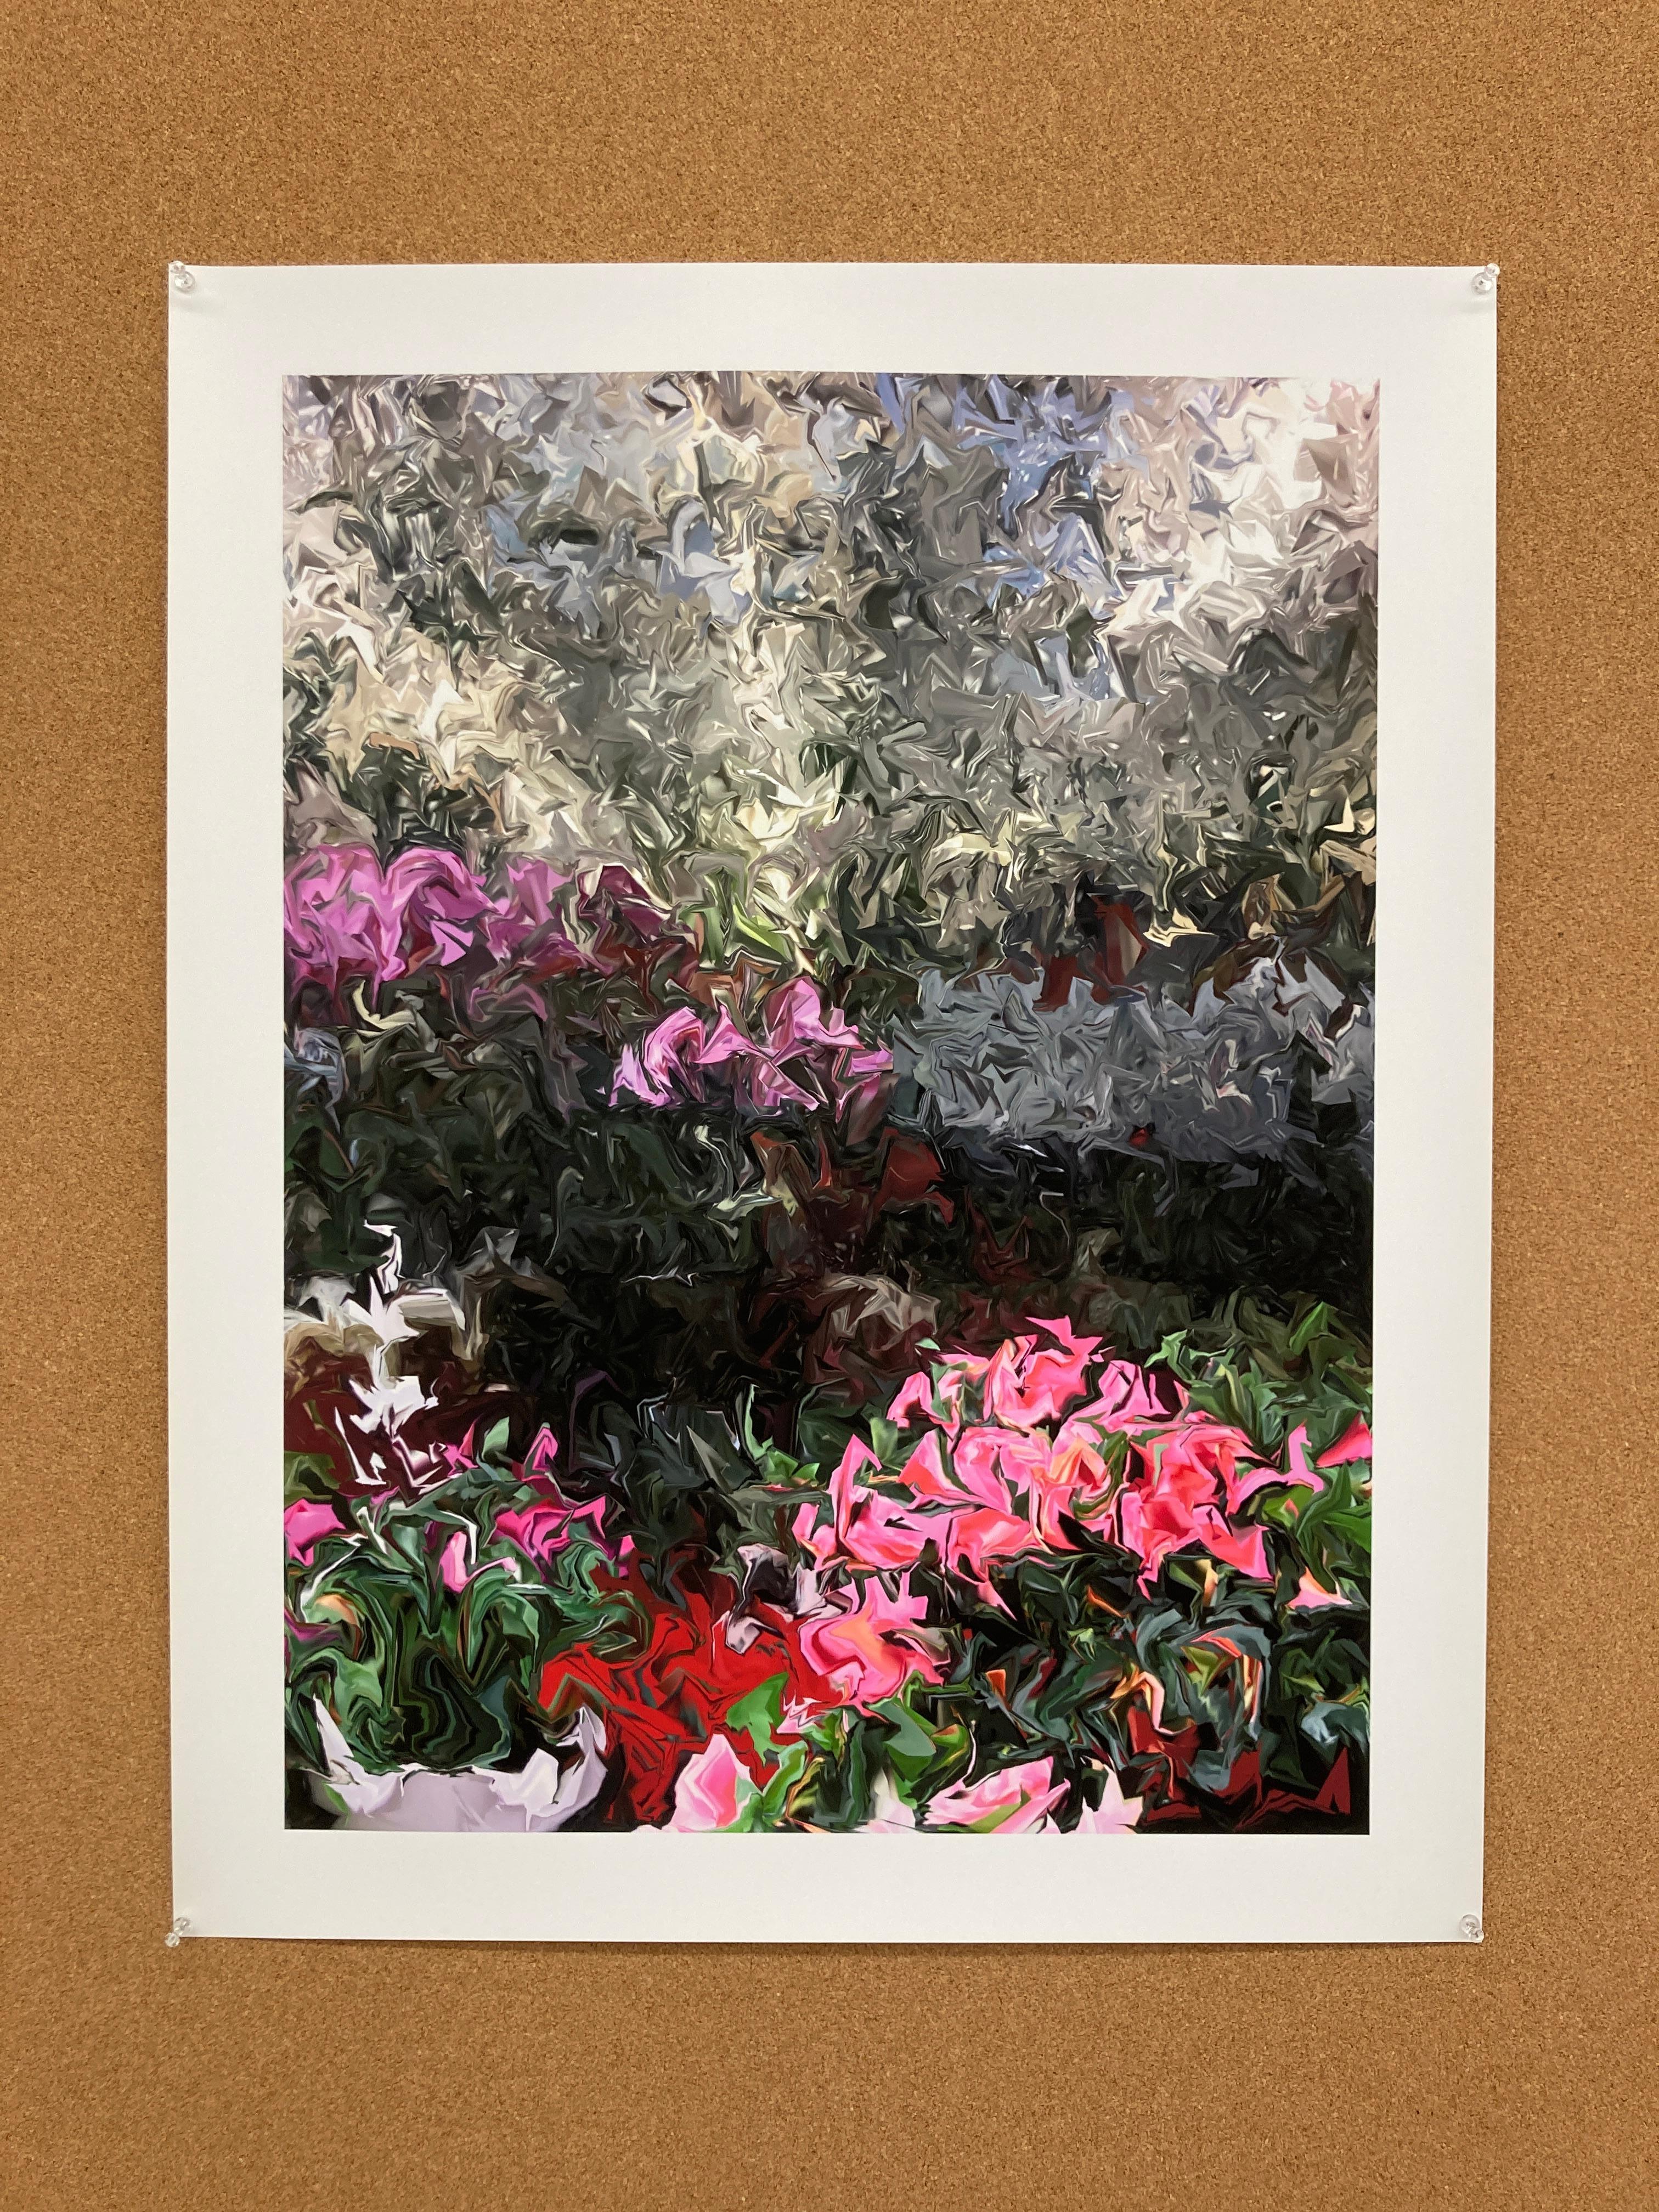 Azaleas and Orchids, 2018, digitally manipulated photograph, signed - Photograph by Gary Cruz